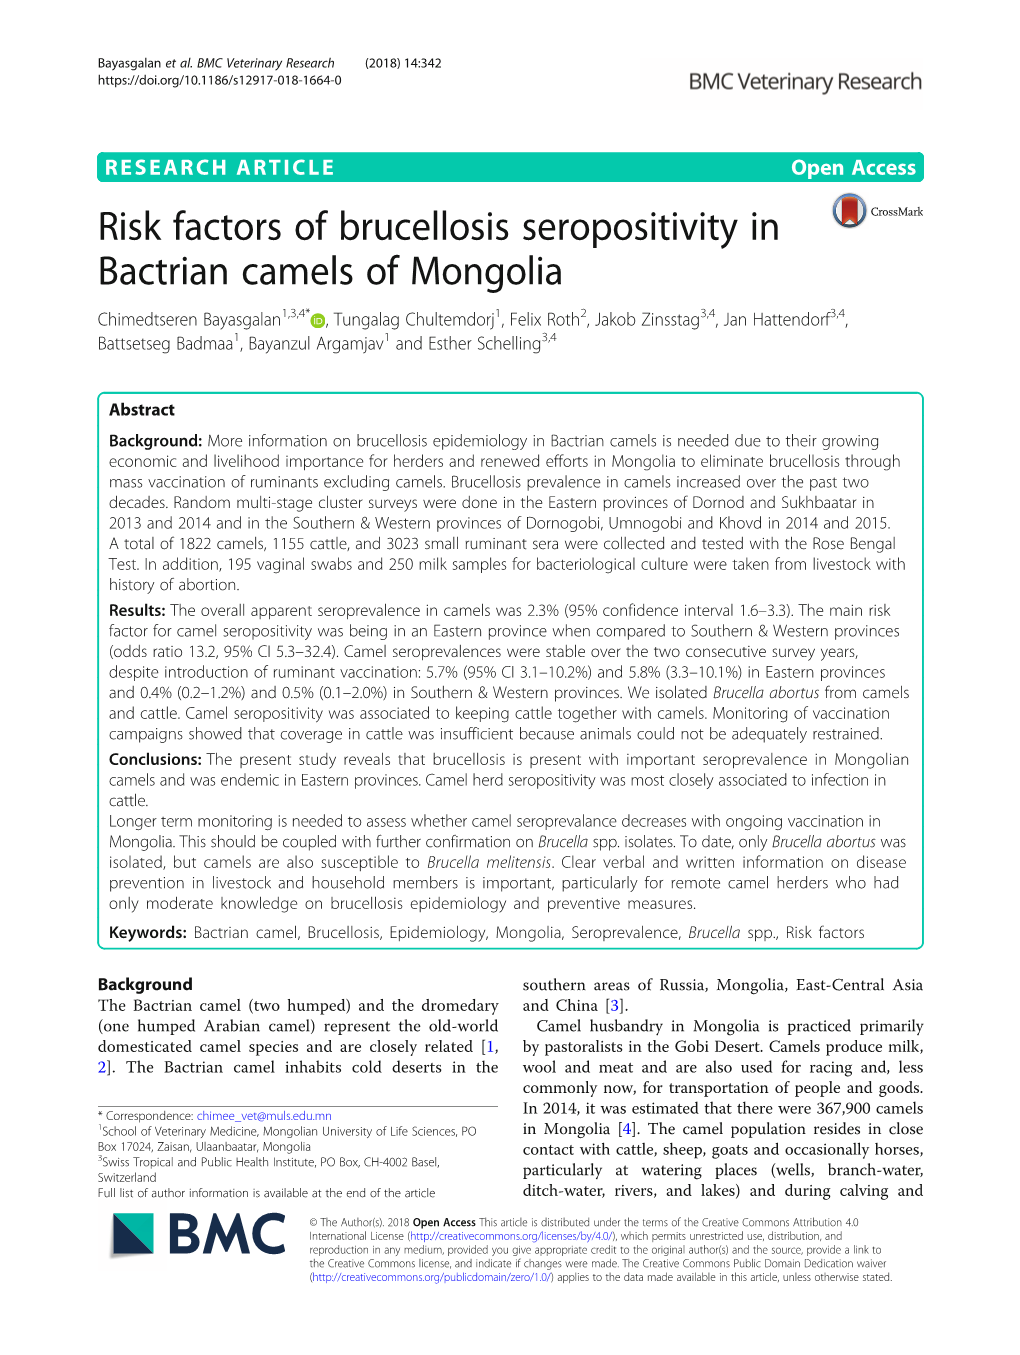 Risk Factors of Brucellosis Seropositivity in Bactrian Camels Of